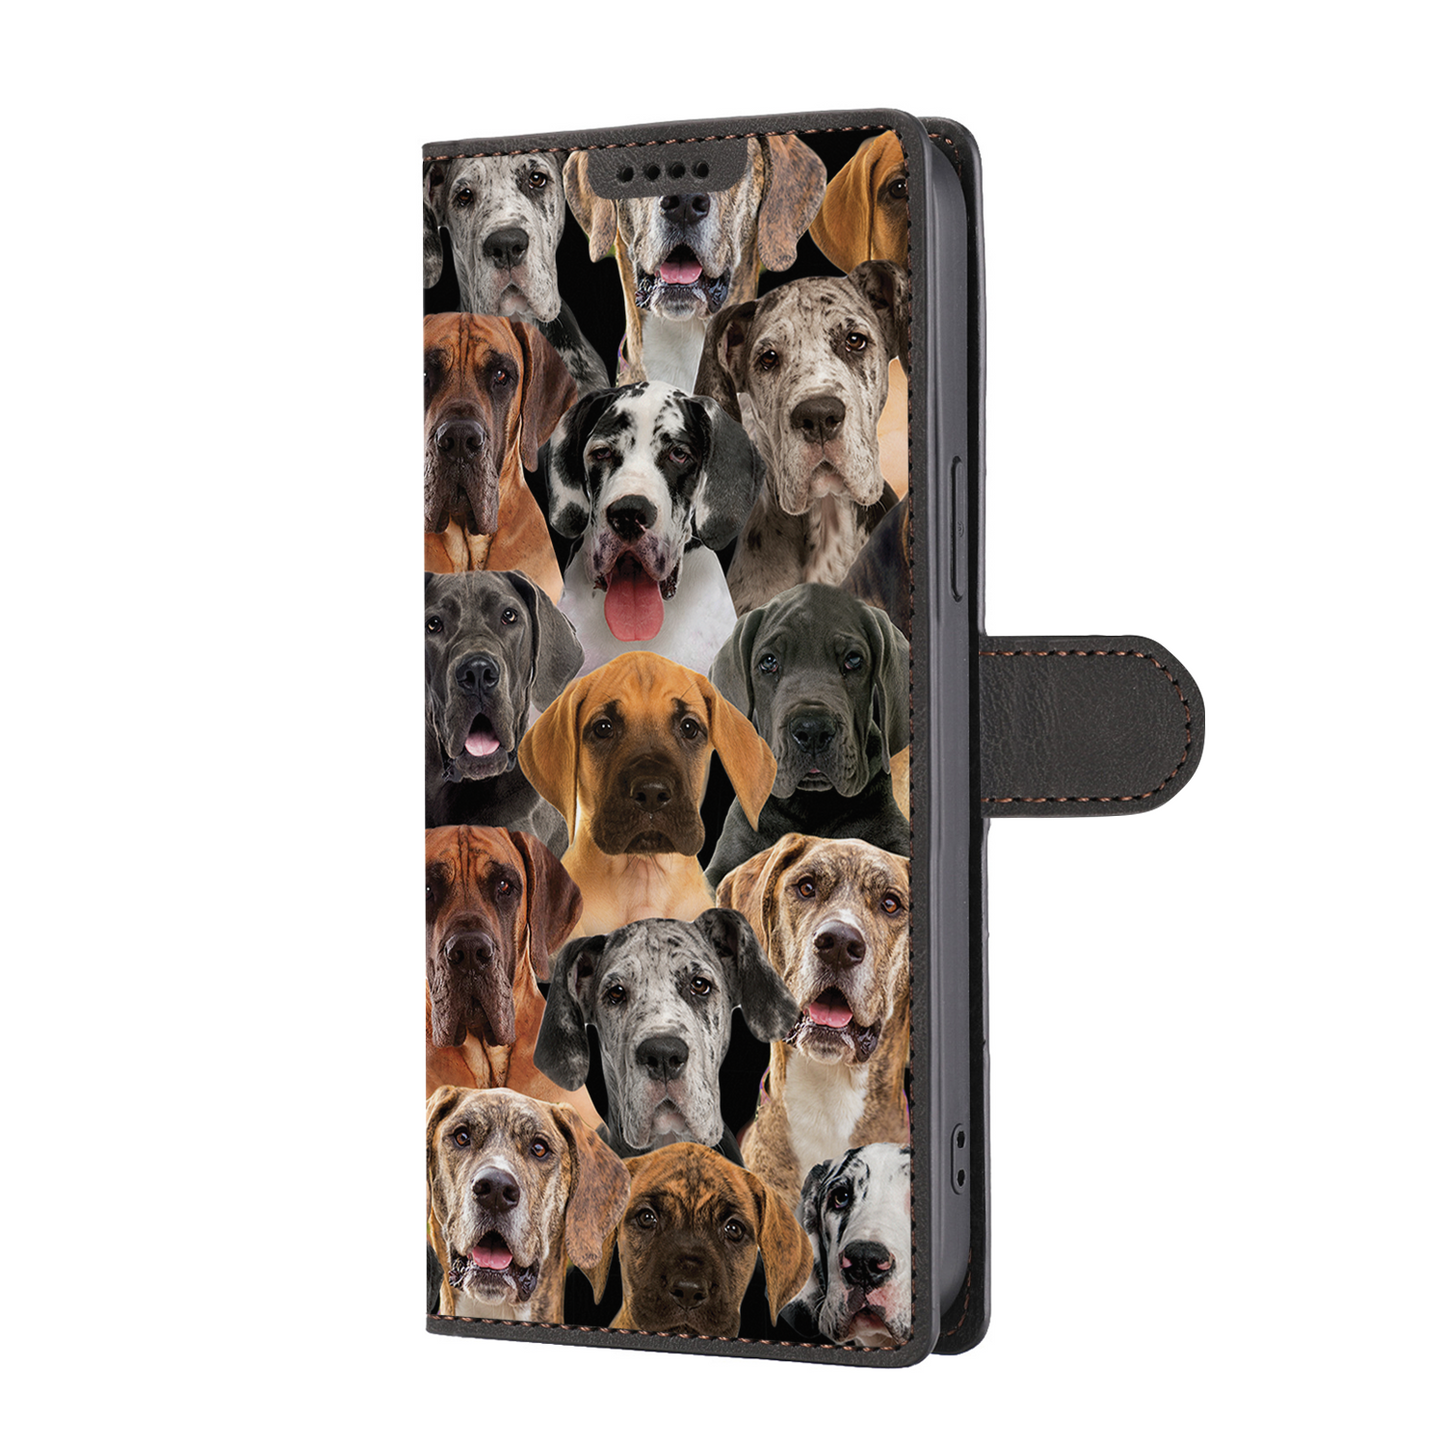 You Will Have A Bunch Of Great Danes - Wallet Case